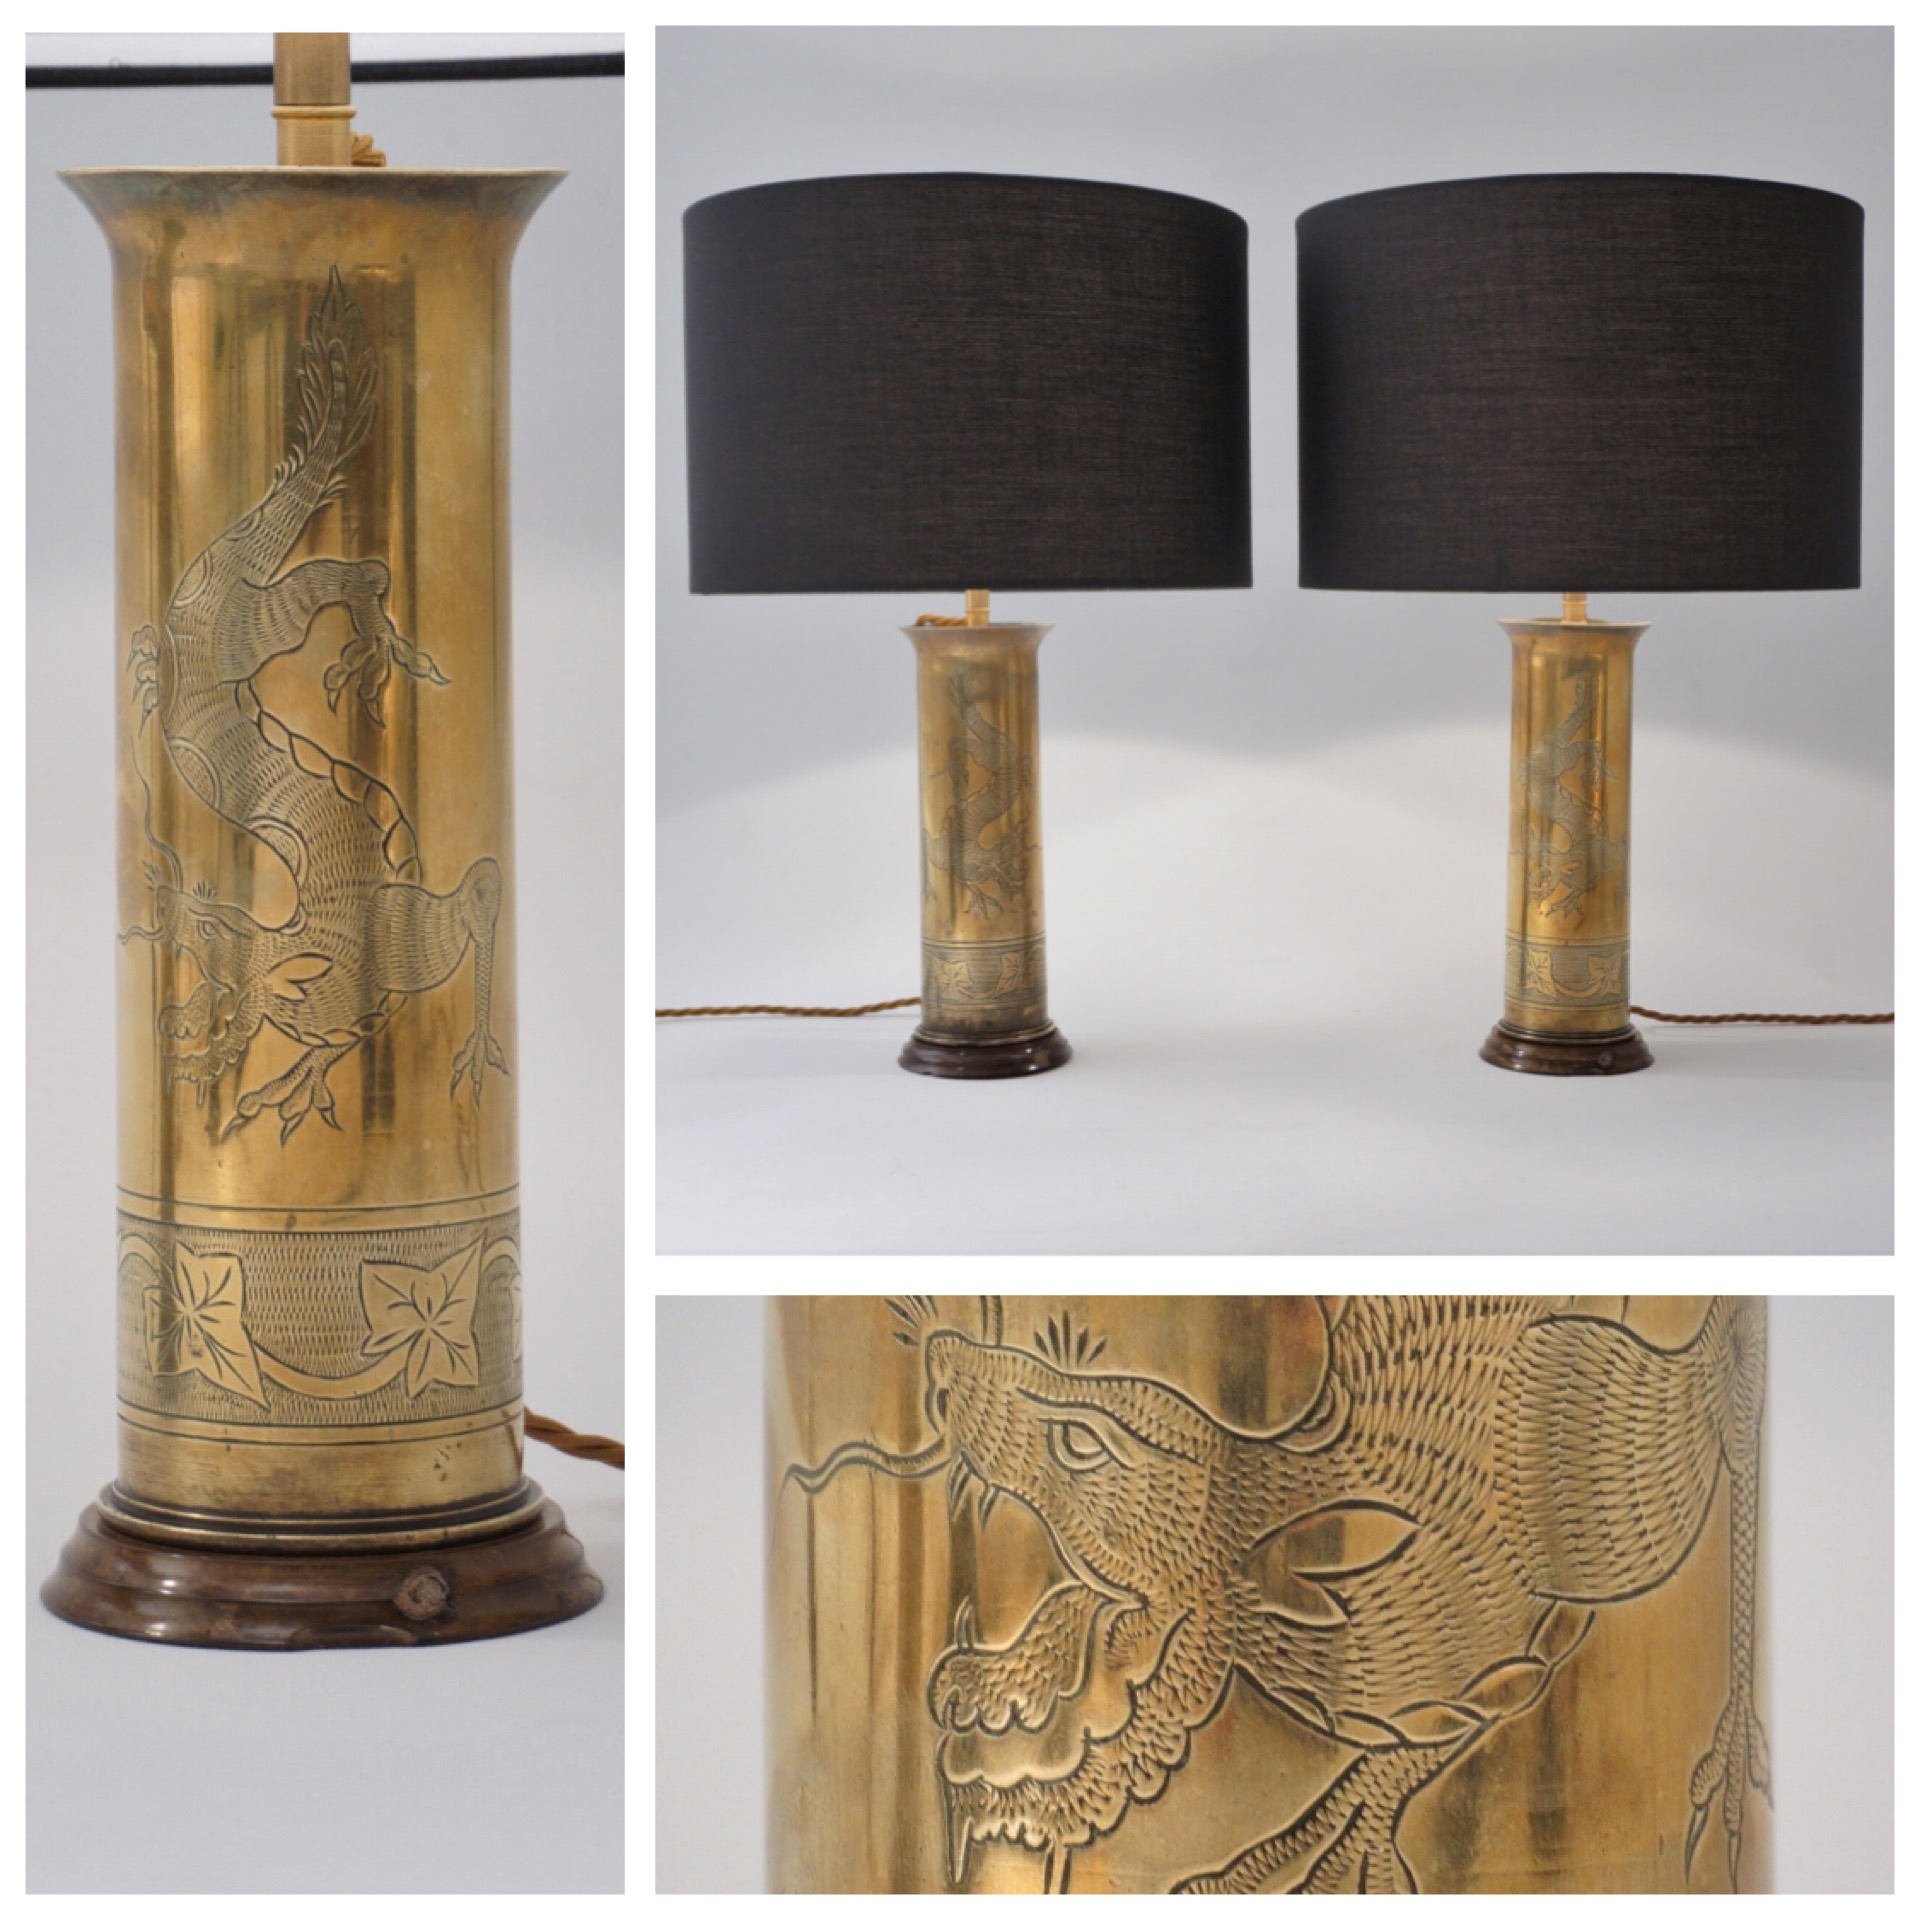 Trench Art shell case table lamps, a pair, brass, Chinoiserie, dragons,  1920`s ca, Japanese in Antique & Vintage Table Lamps from Roomscape